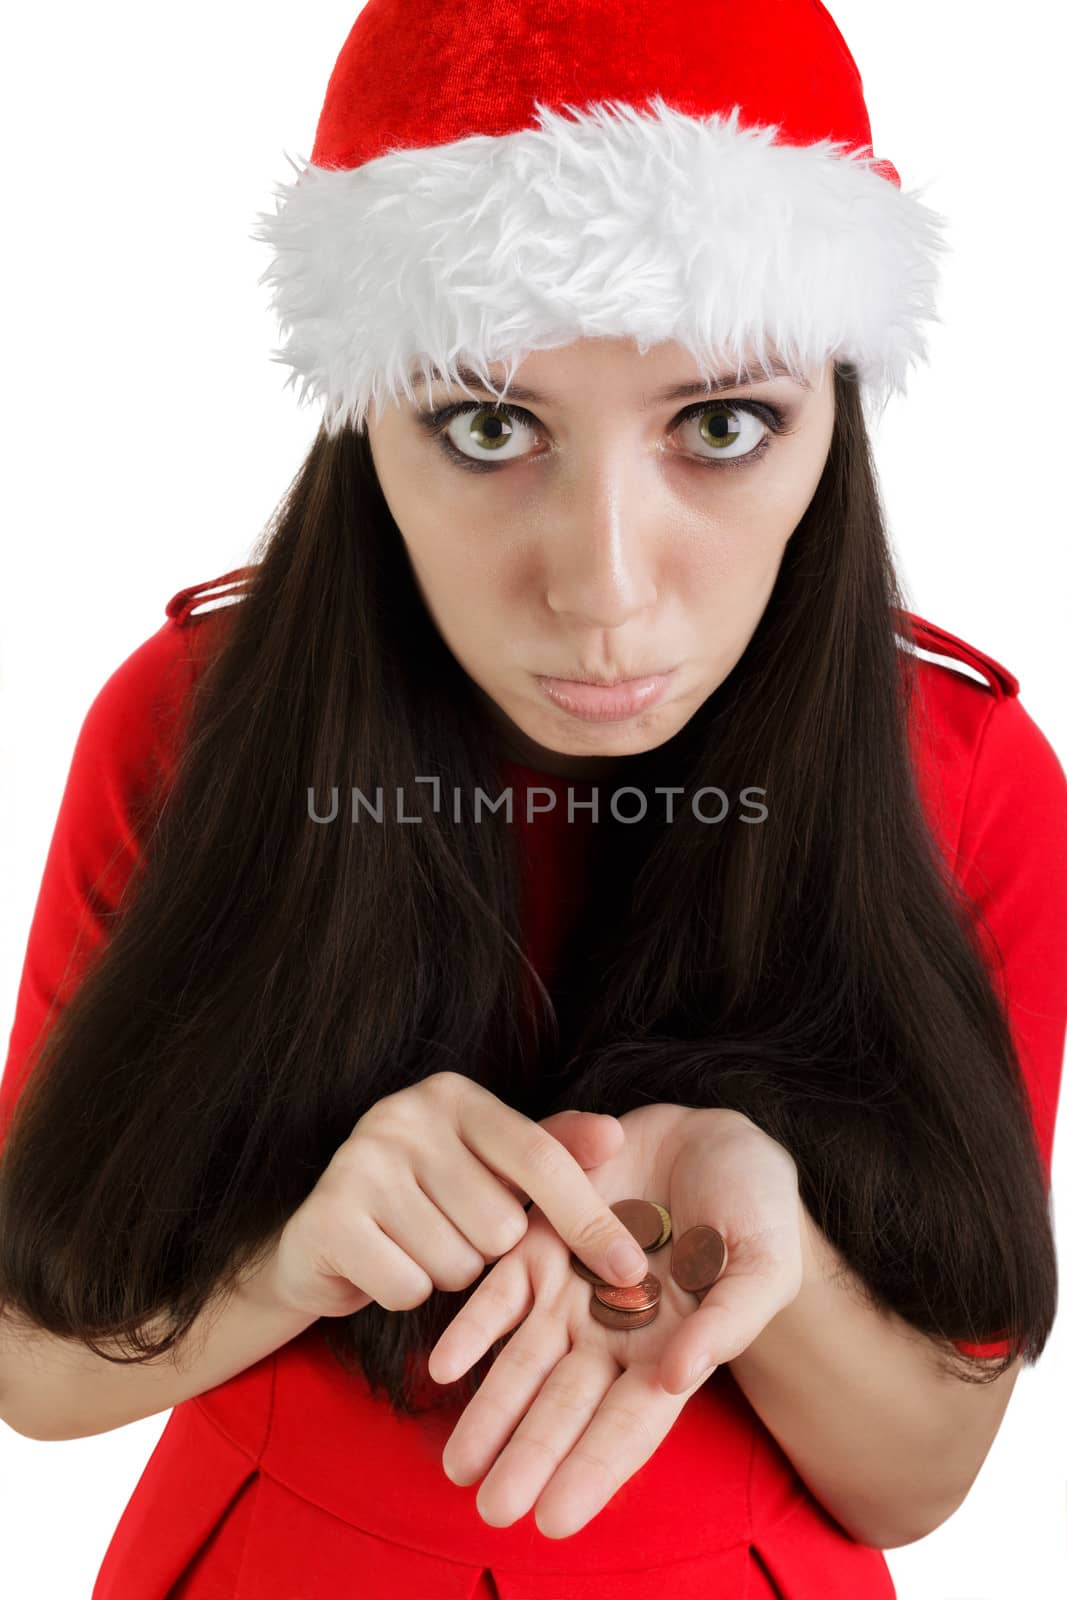 Christmas Girl with Not Enough Money by NicoletaIonescu